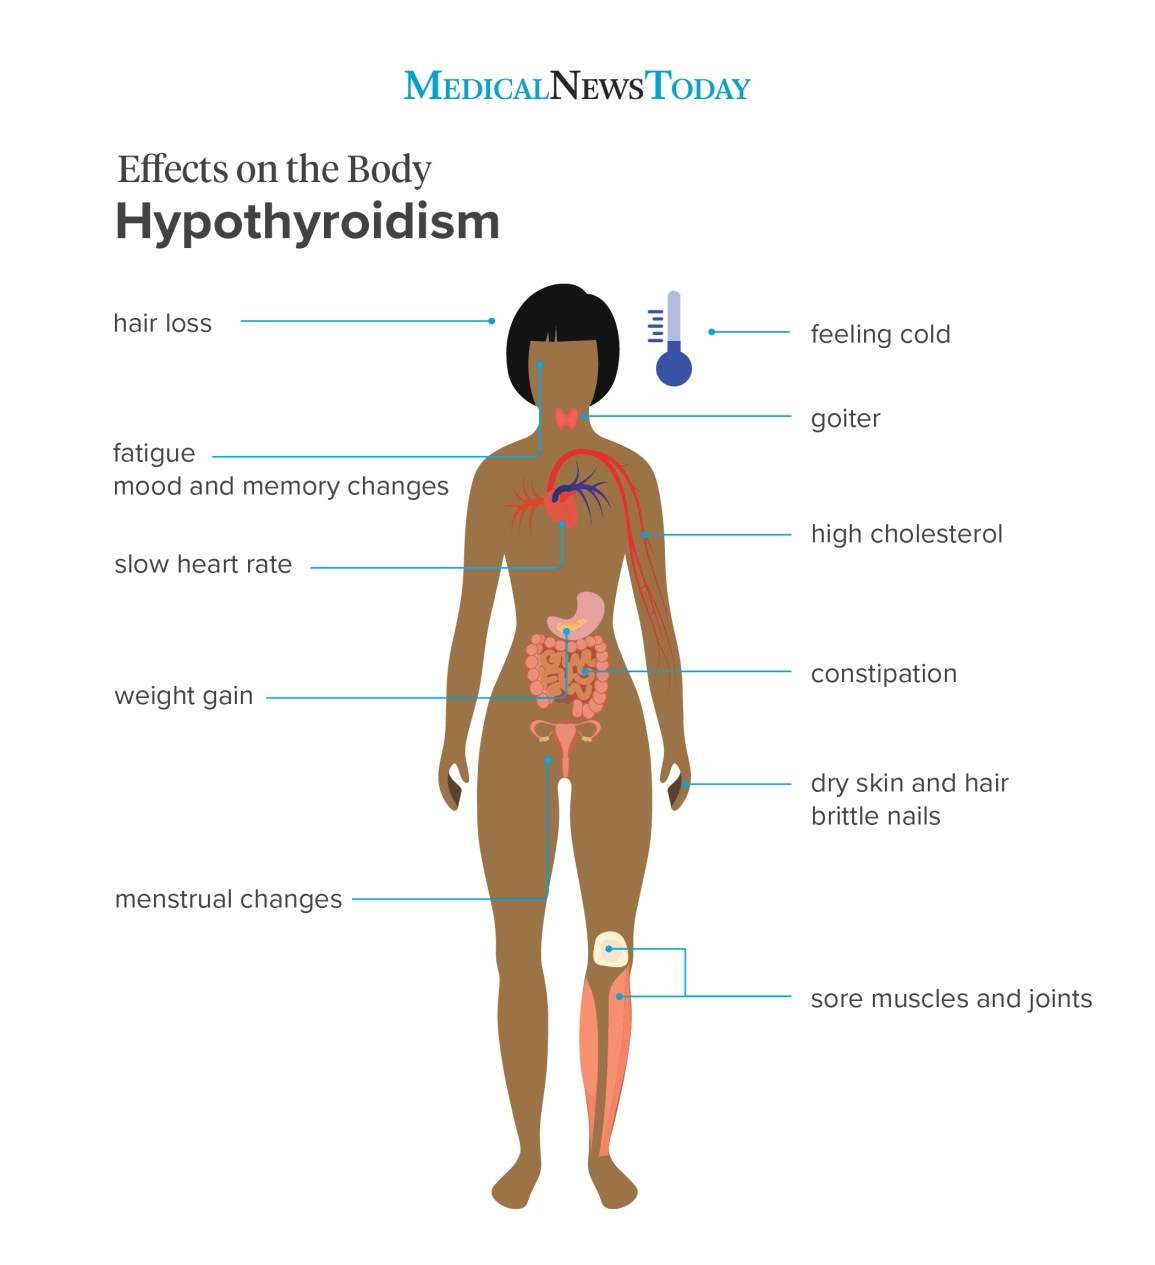 Hypothyroidism symptoms: 12 signs to look out for